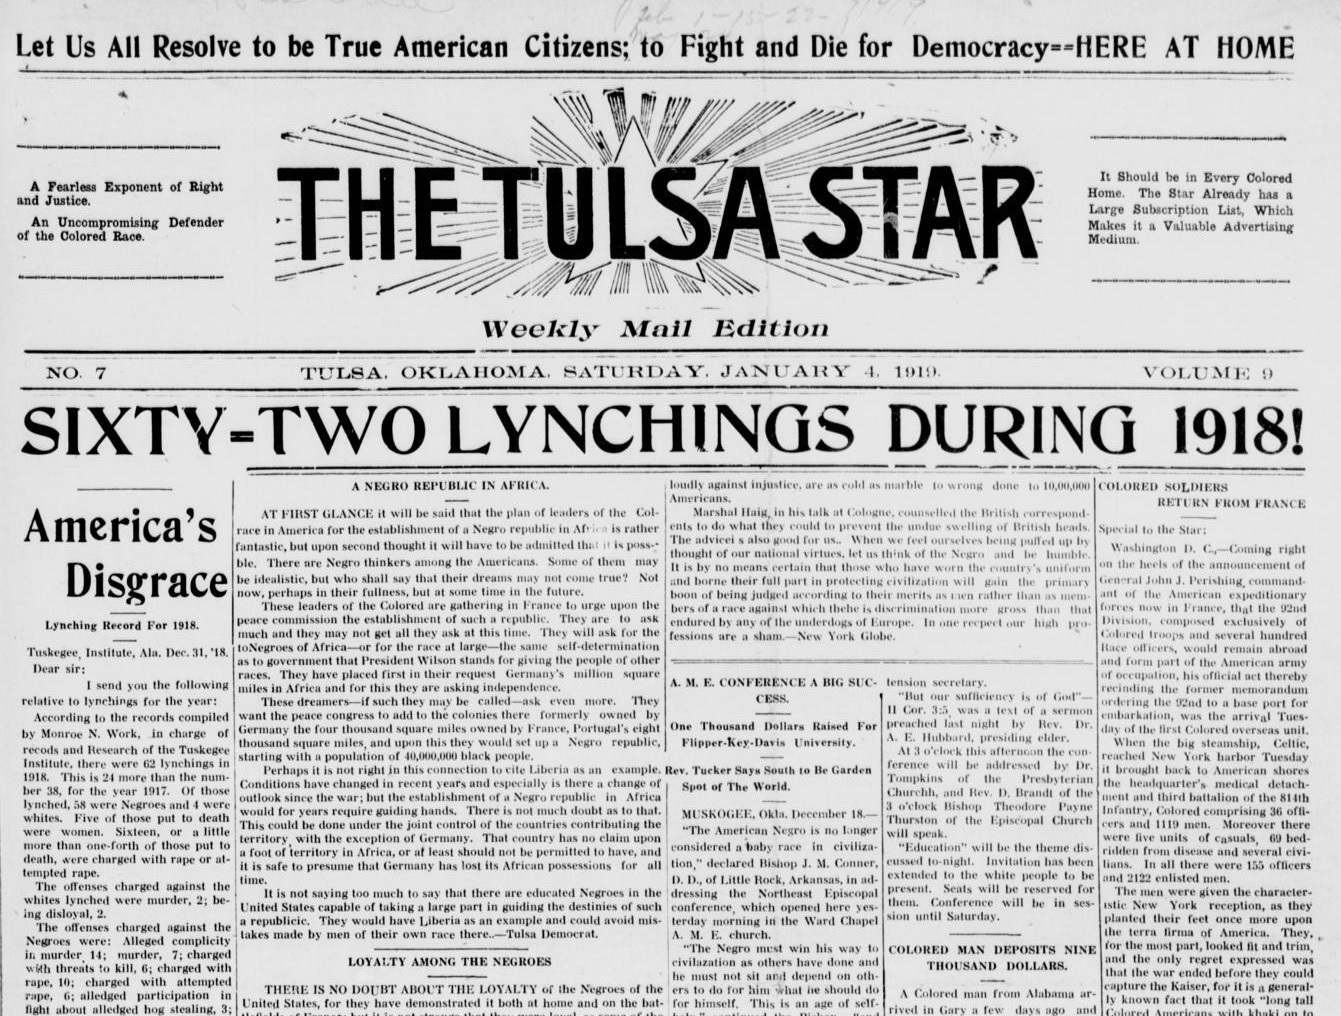 The image depicts the top half of the front page of the January 4, 1919 edition of the Tulsa Star. The newspaper had a large headline, Sixty-Two Lynchings in 1918!” The article had a sub-header, “America’s Disgrace” and detailed the “Lynching Record for 1918” which included 58 Black victims across 16 states.